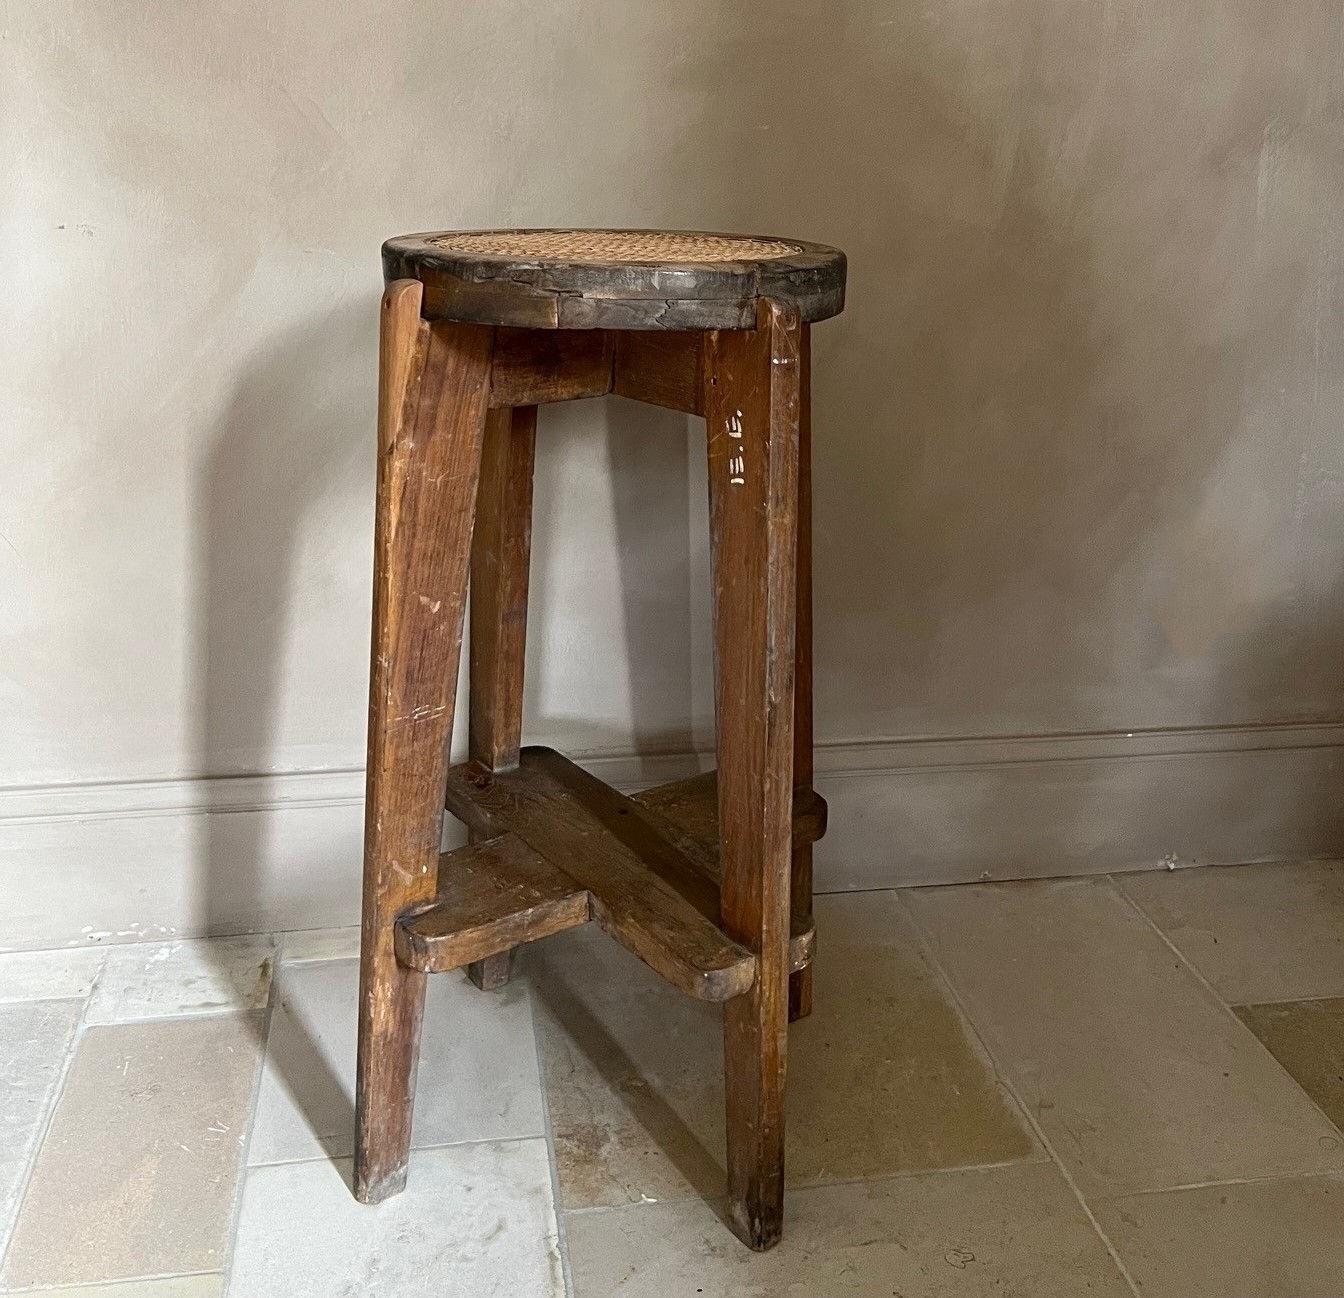 Pierre Jeanneret Chandigarh high stool with canework PJ-011001 For Sale 6